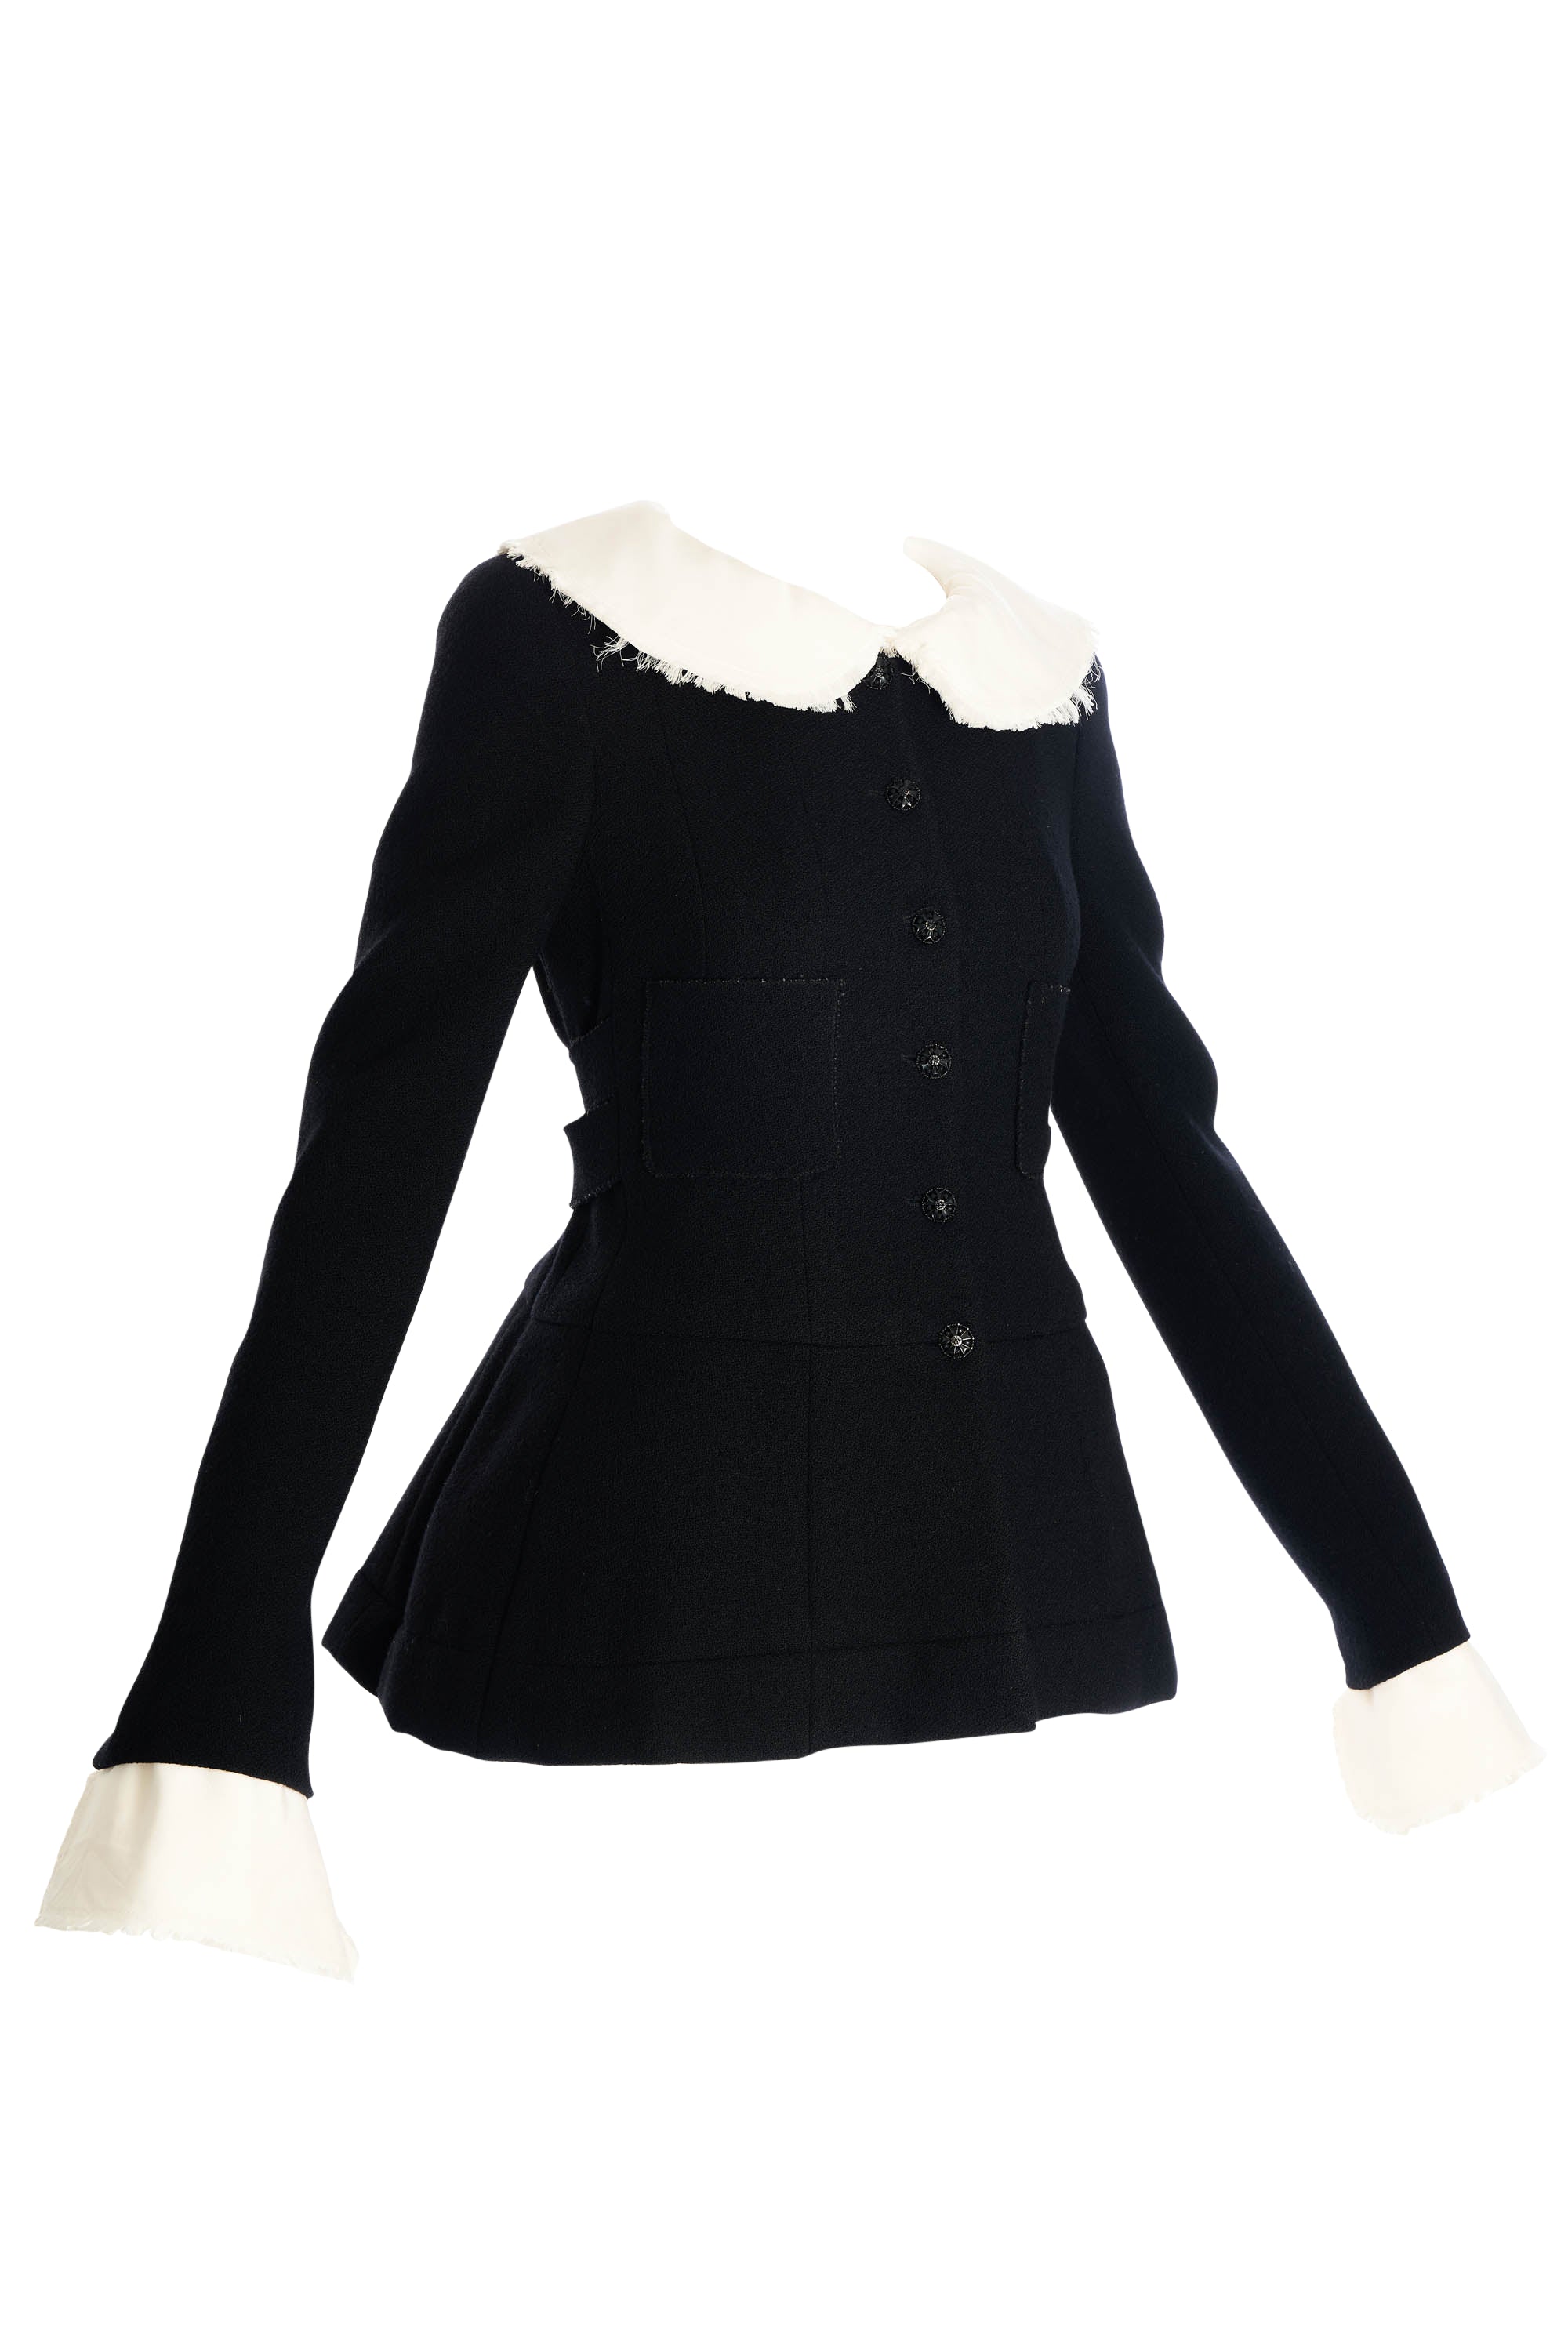 Chanel Black Jacket With Peter Pan Collar 2008A